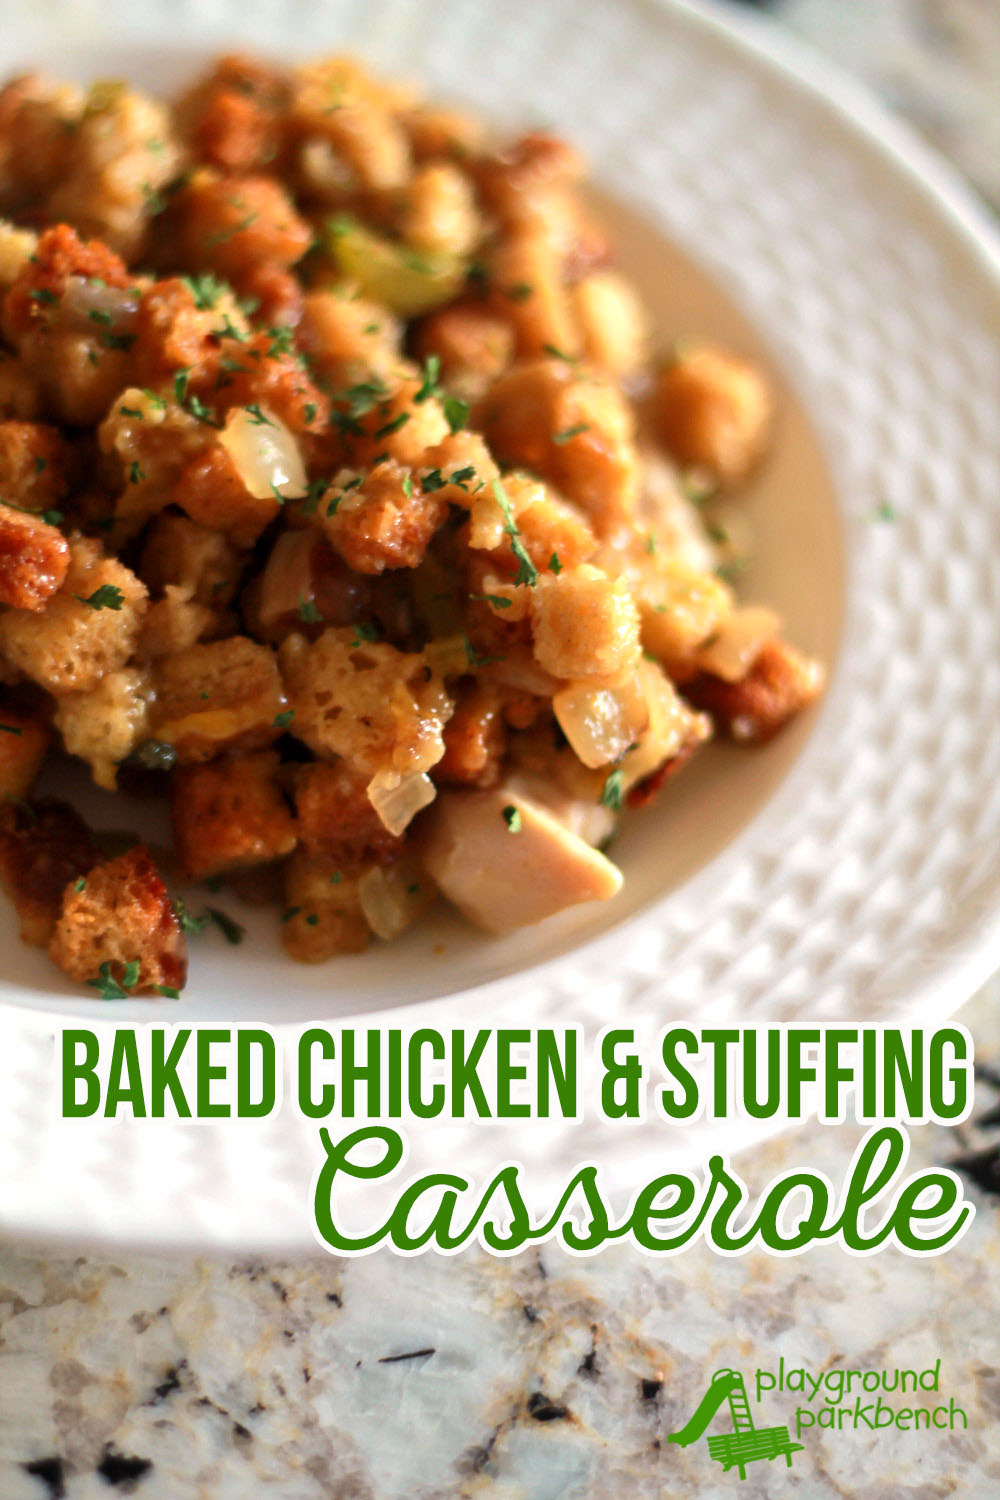 A traditional family favorite in a one-dish, easy prep, quick clean-up twist. This Real Mom Meal features chicken and homemade stuffing with fresh herbs baked and served as a one-dish casserole. Pair with a simple steamed veggie or side salad for a quick and easy weeknight meal for your family. From fridge to table in under an hour! | Real Mom Meals | Family Dinners | Dinner | Chicken | Family Friendly Food | Kid Friendly Food | One Dish Meal | Casserole